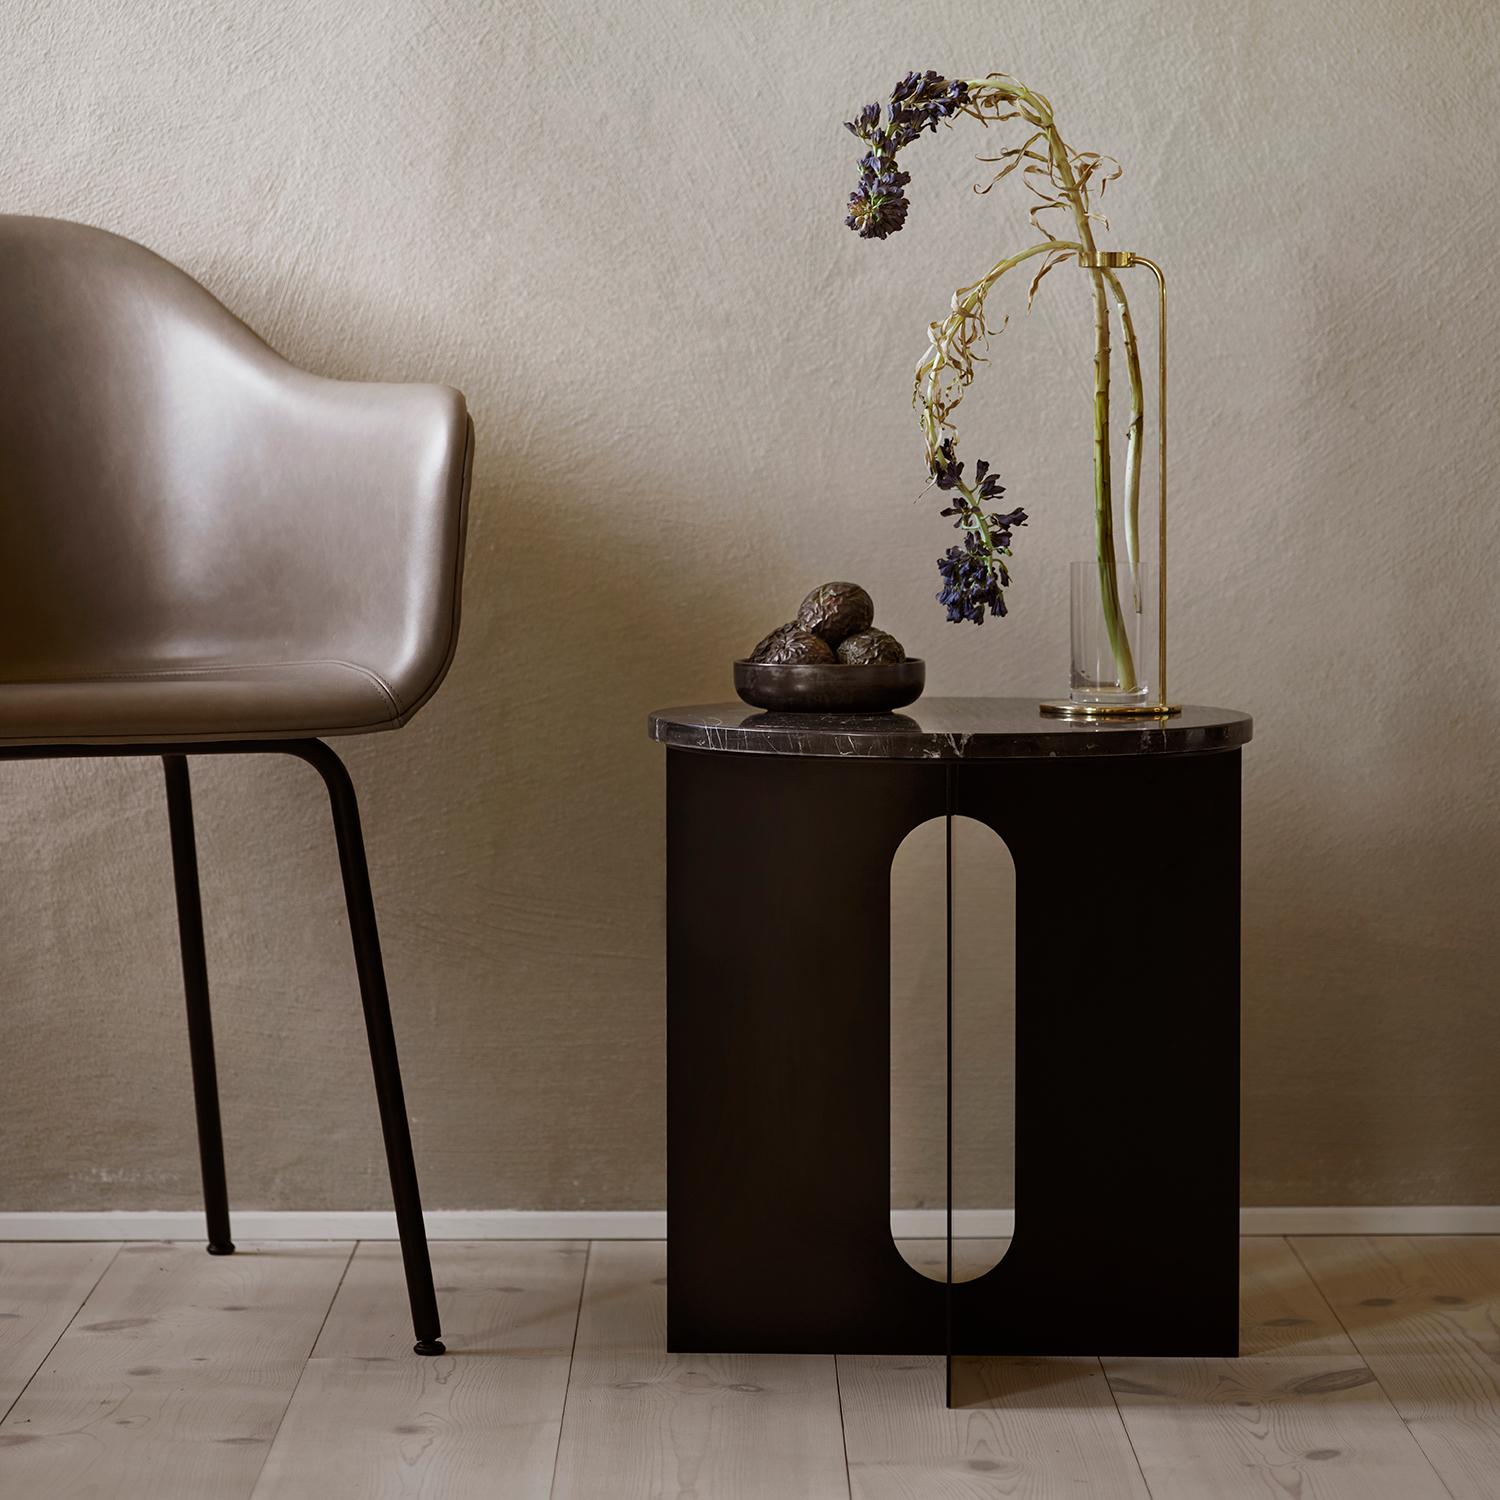 Androgyne Side Table, Steel Base in Black, Tabletop in Black Marble In New Condition For Sale In San Marcos, CA